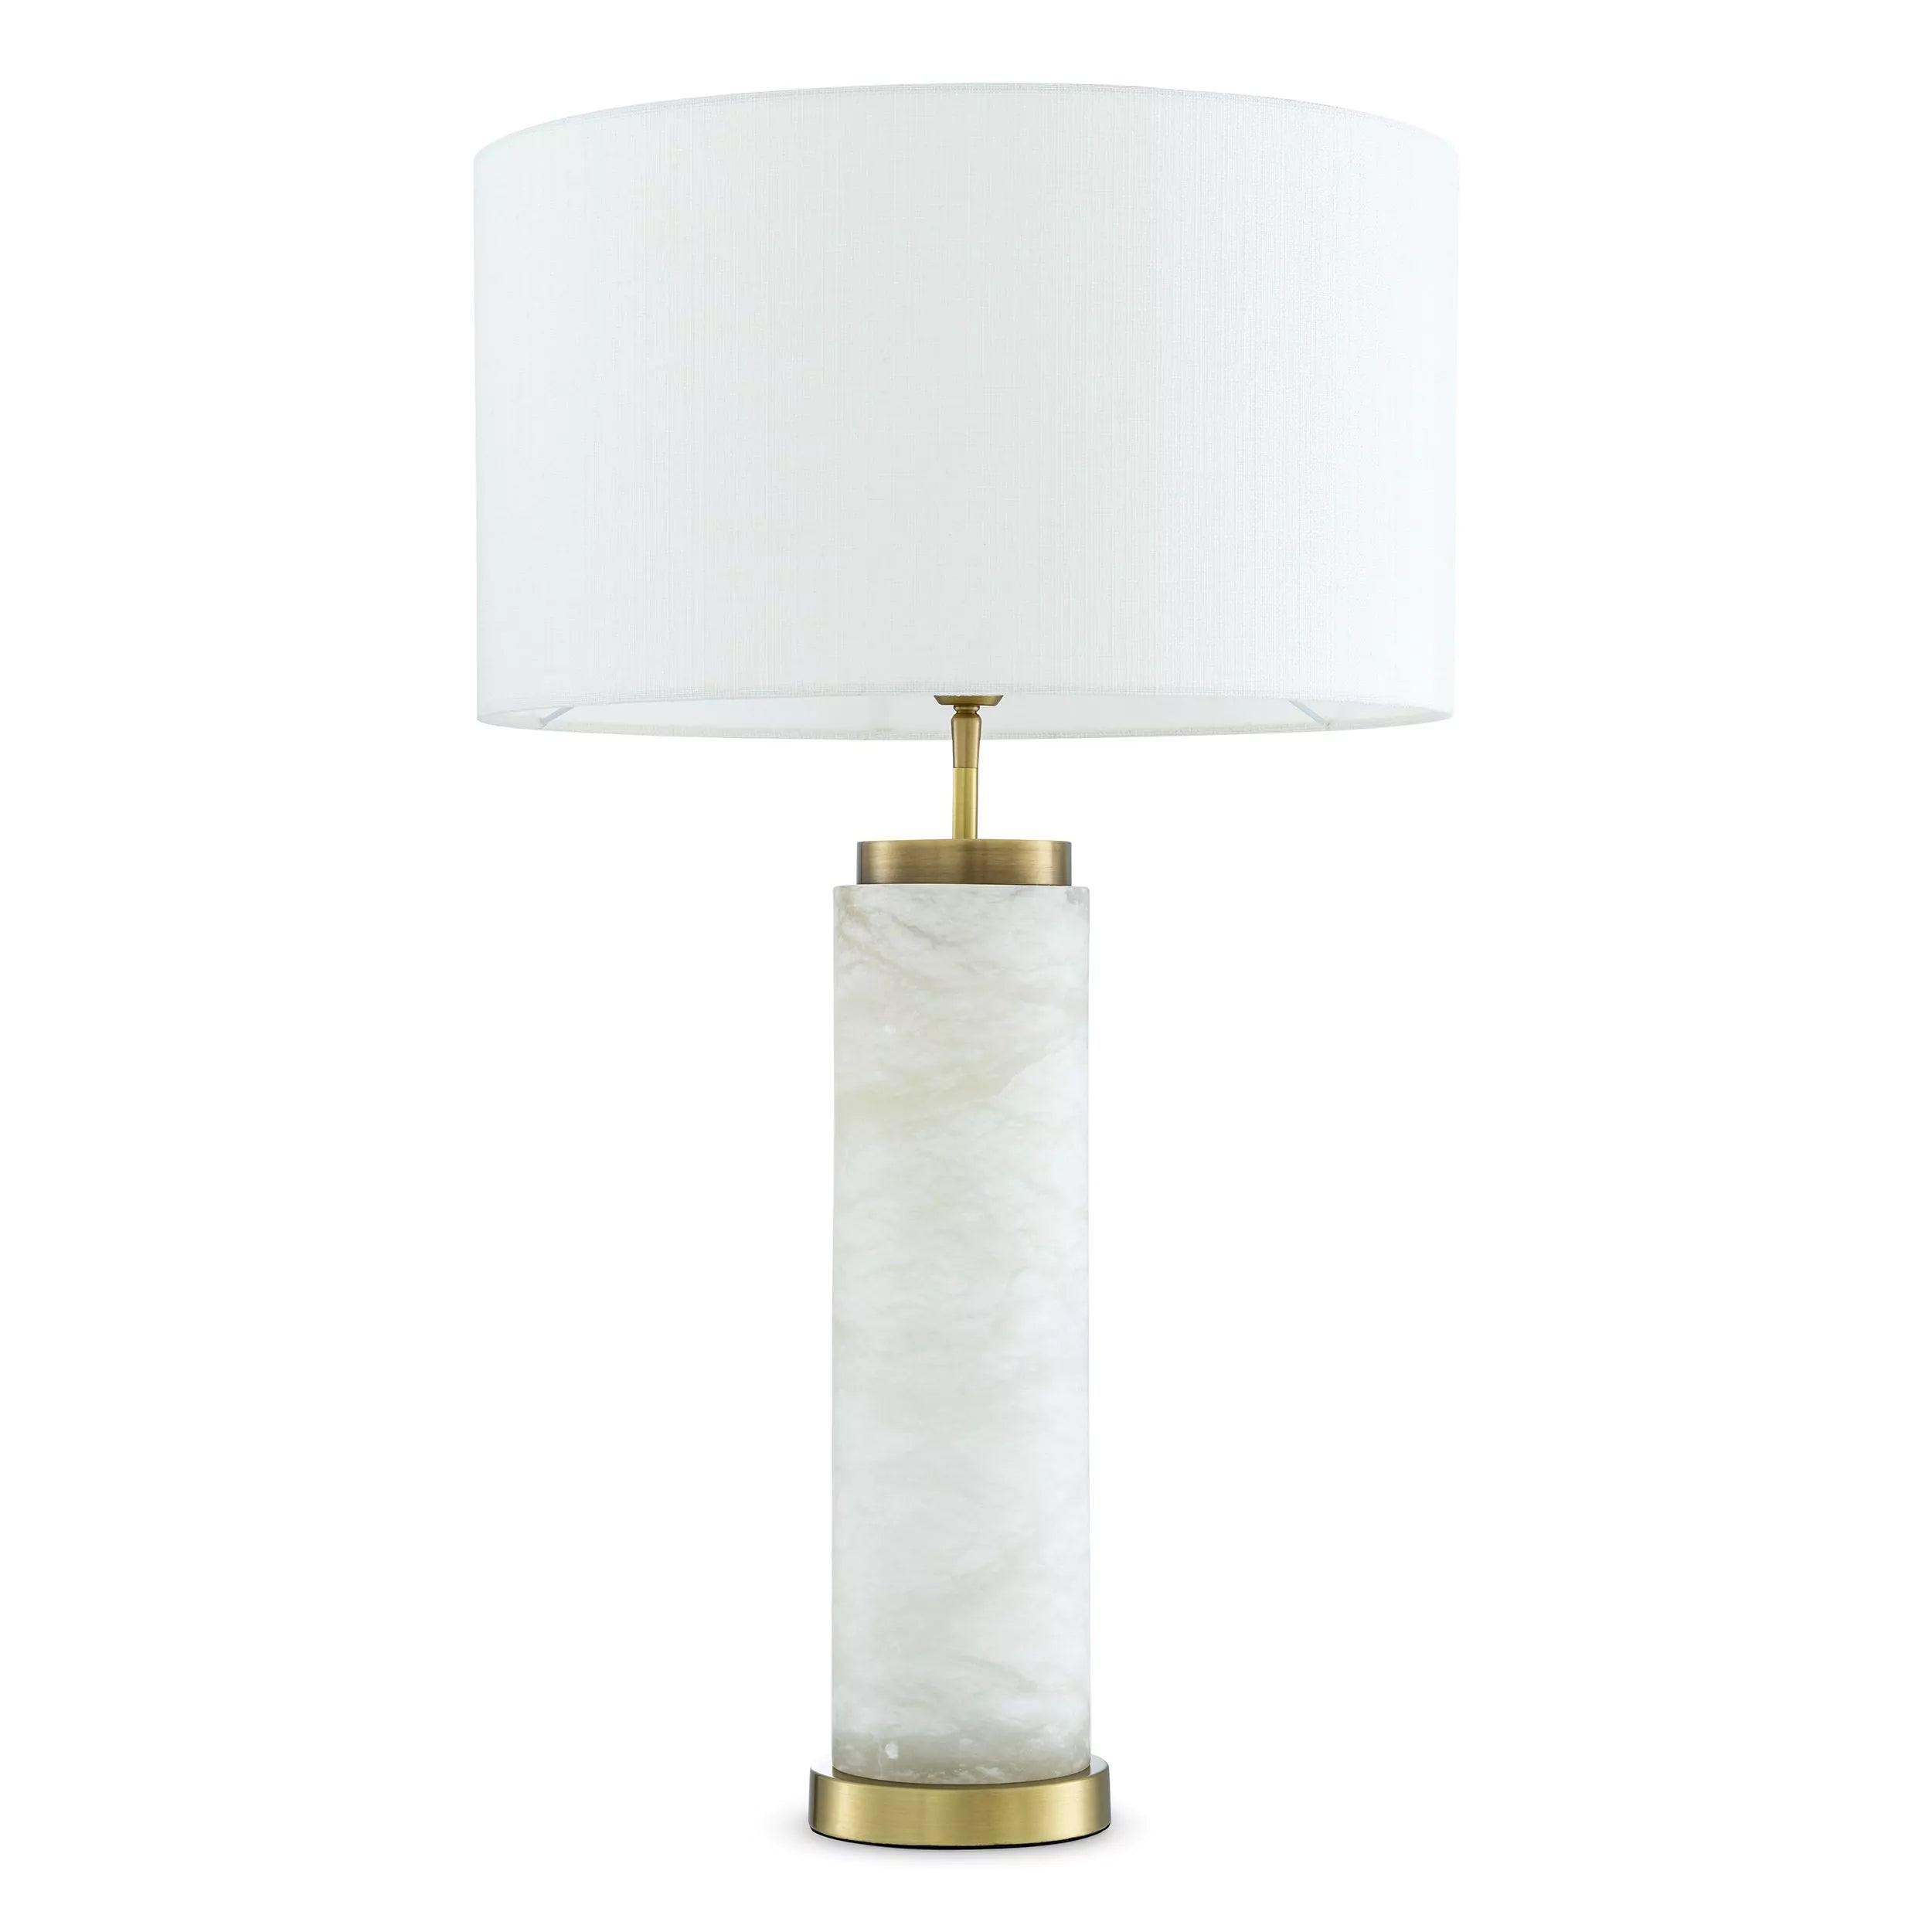 Lxry Table Lamp - (Grey Marble/White/Cream Alabaster) Eichholtz - Luxury Lighting Boutique